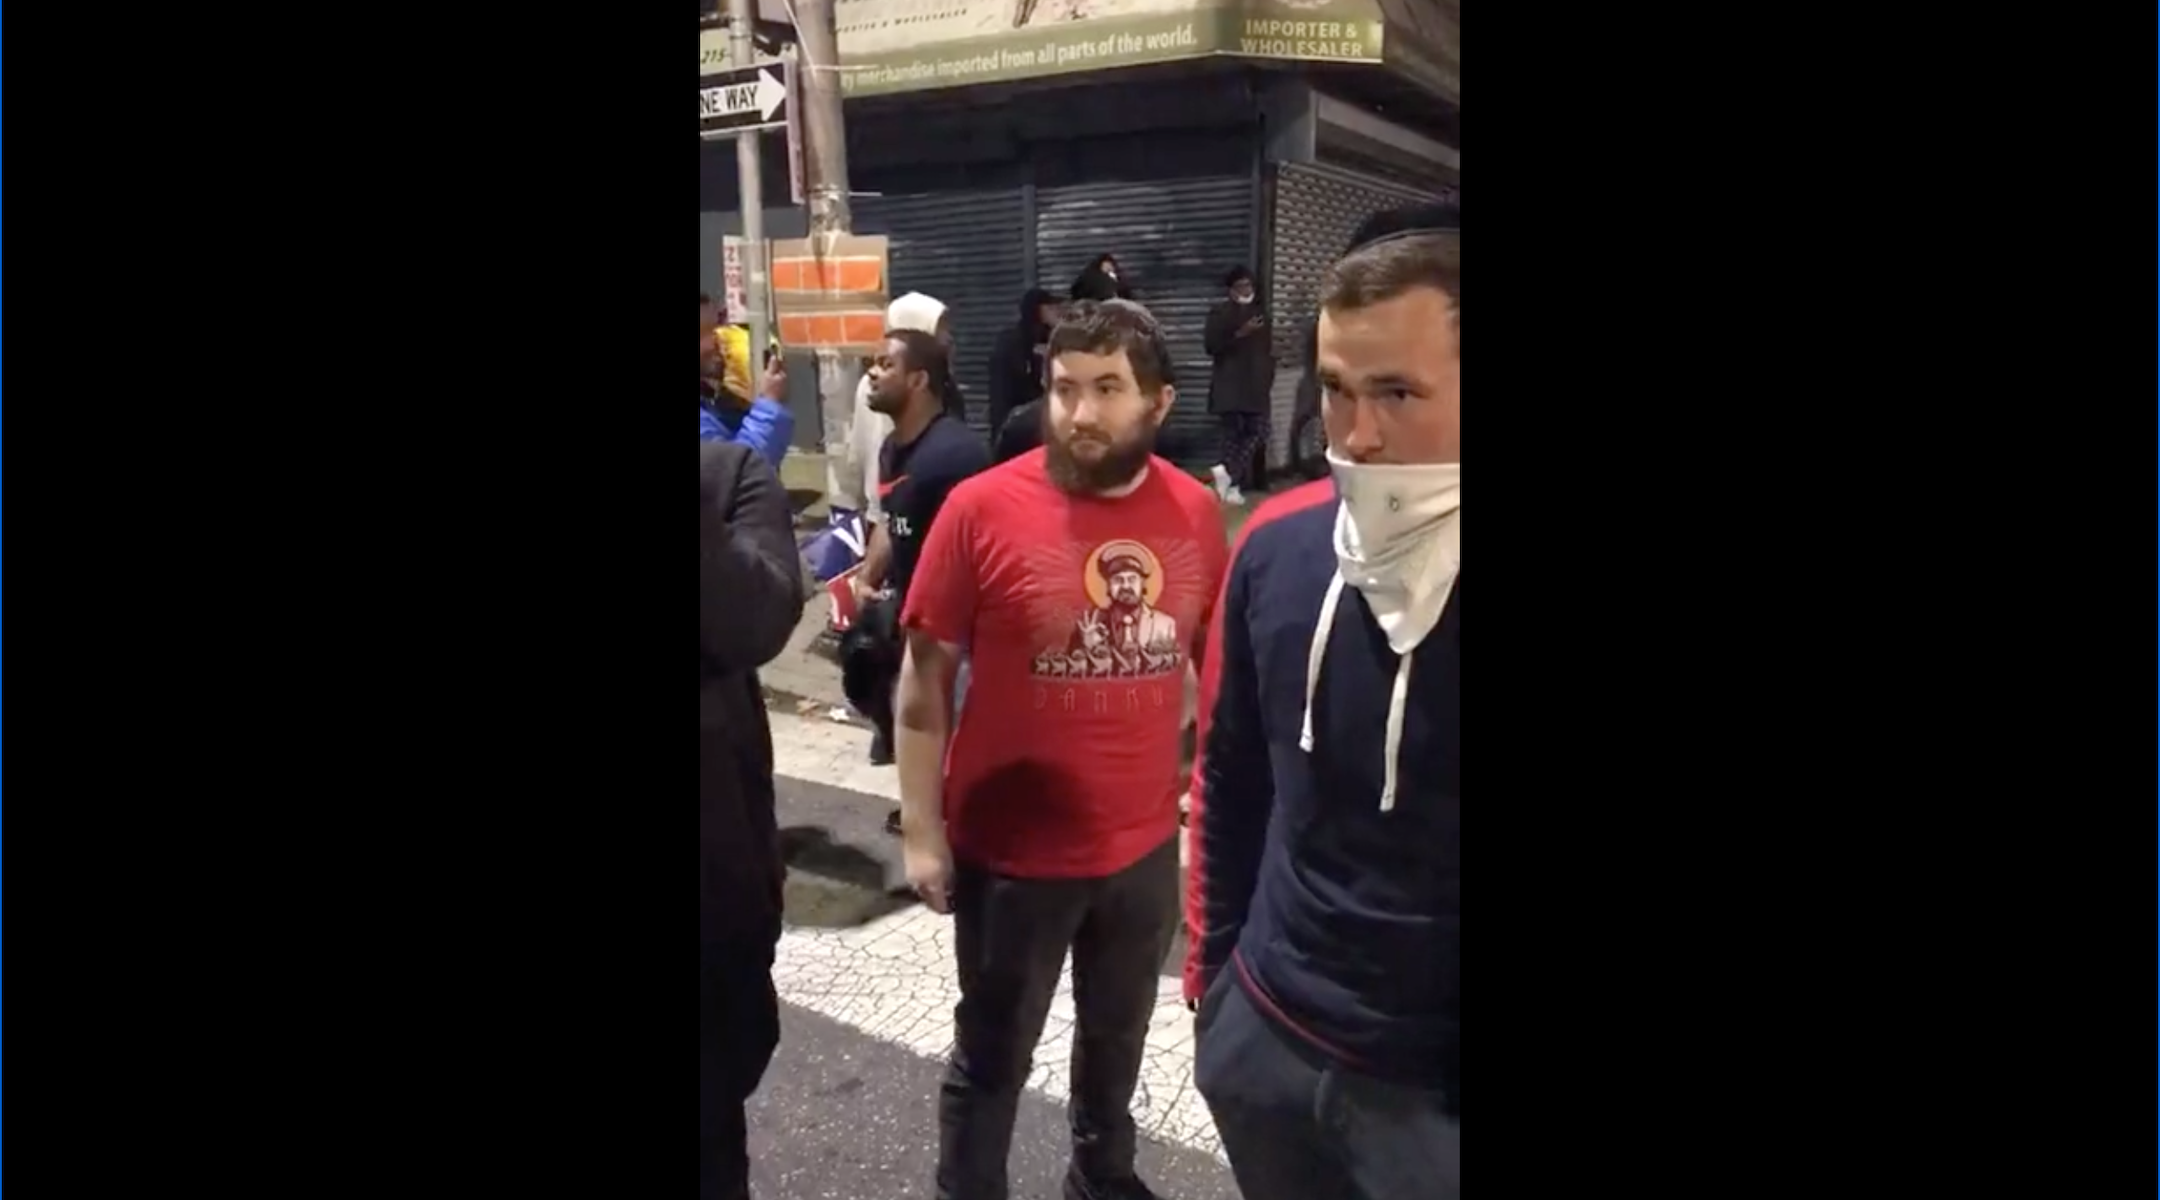 A screenshot from a video of an anti-Semitic incident on Tuesday night. (Screenshot from Instagram)